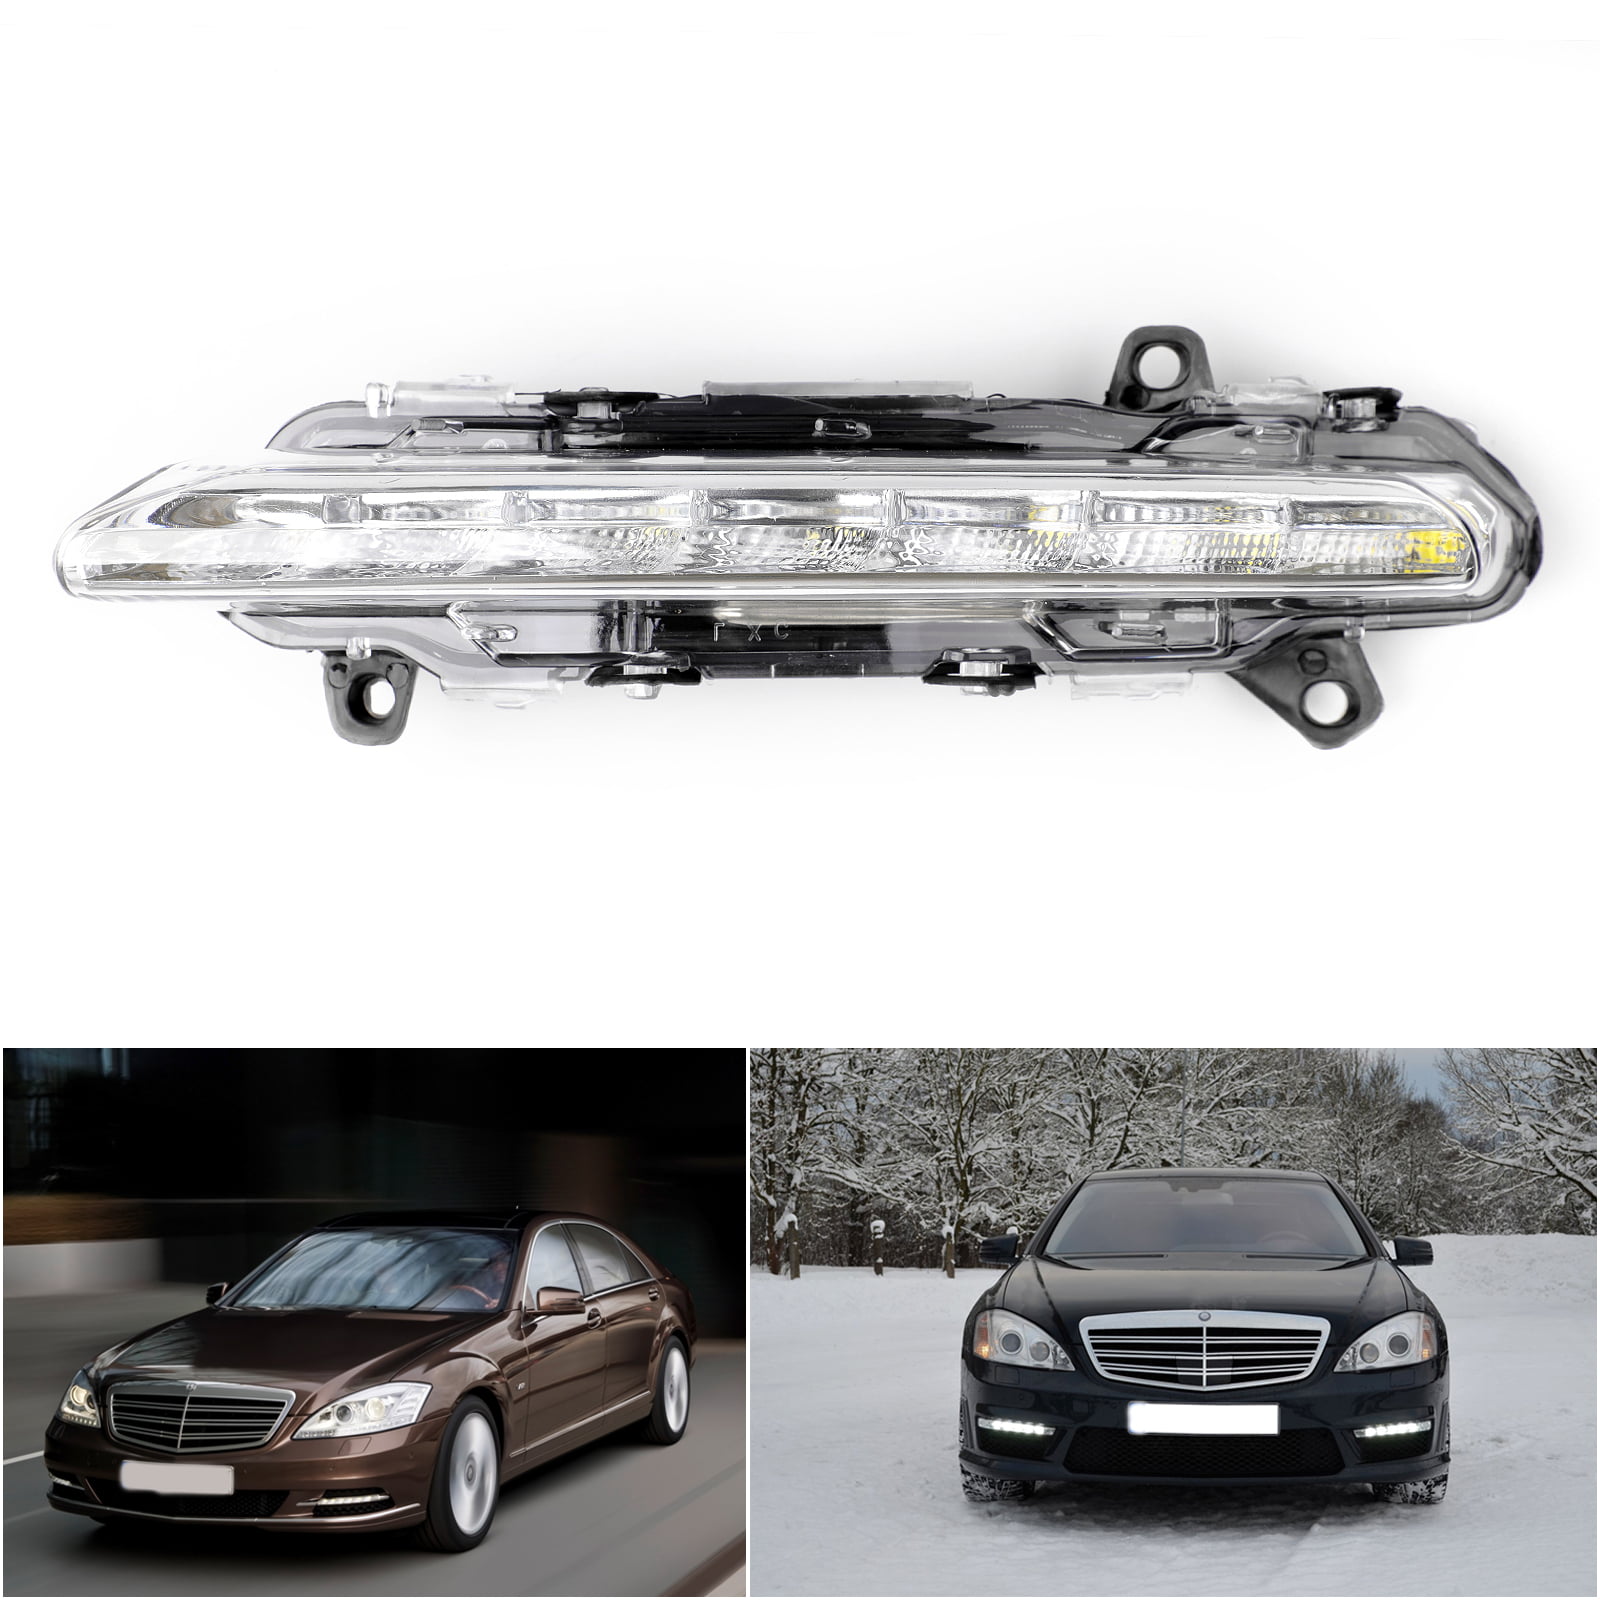 Fit 6000K DRL LED Daytime Running Lights Benz Style Driving Bumper Fog Lamps